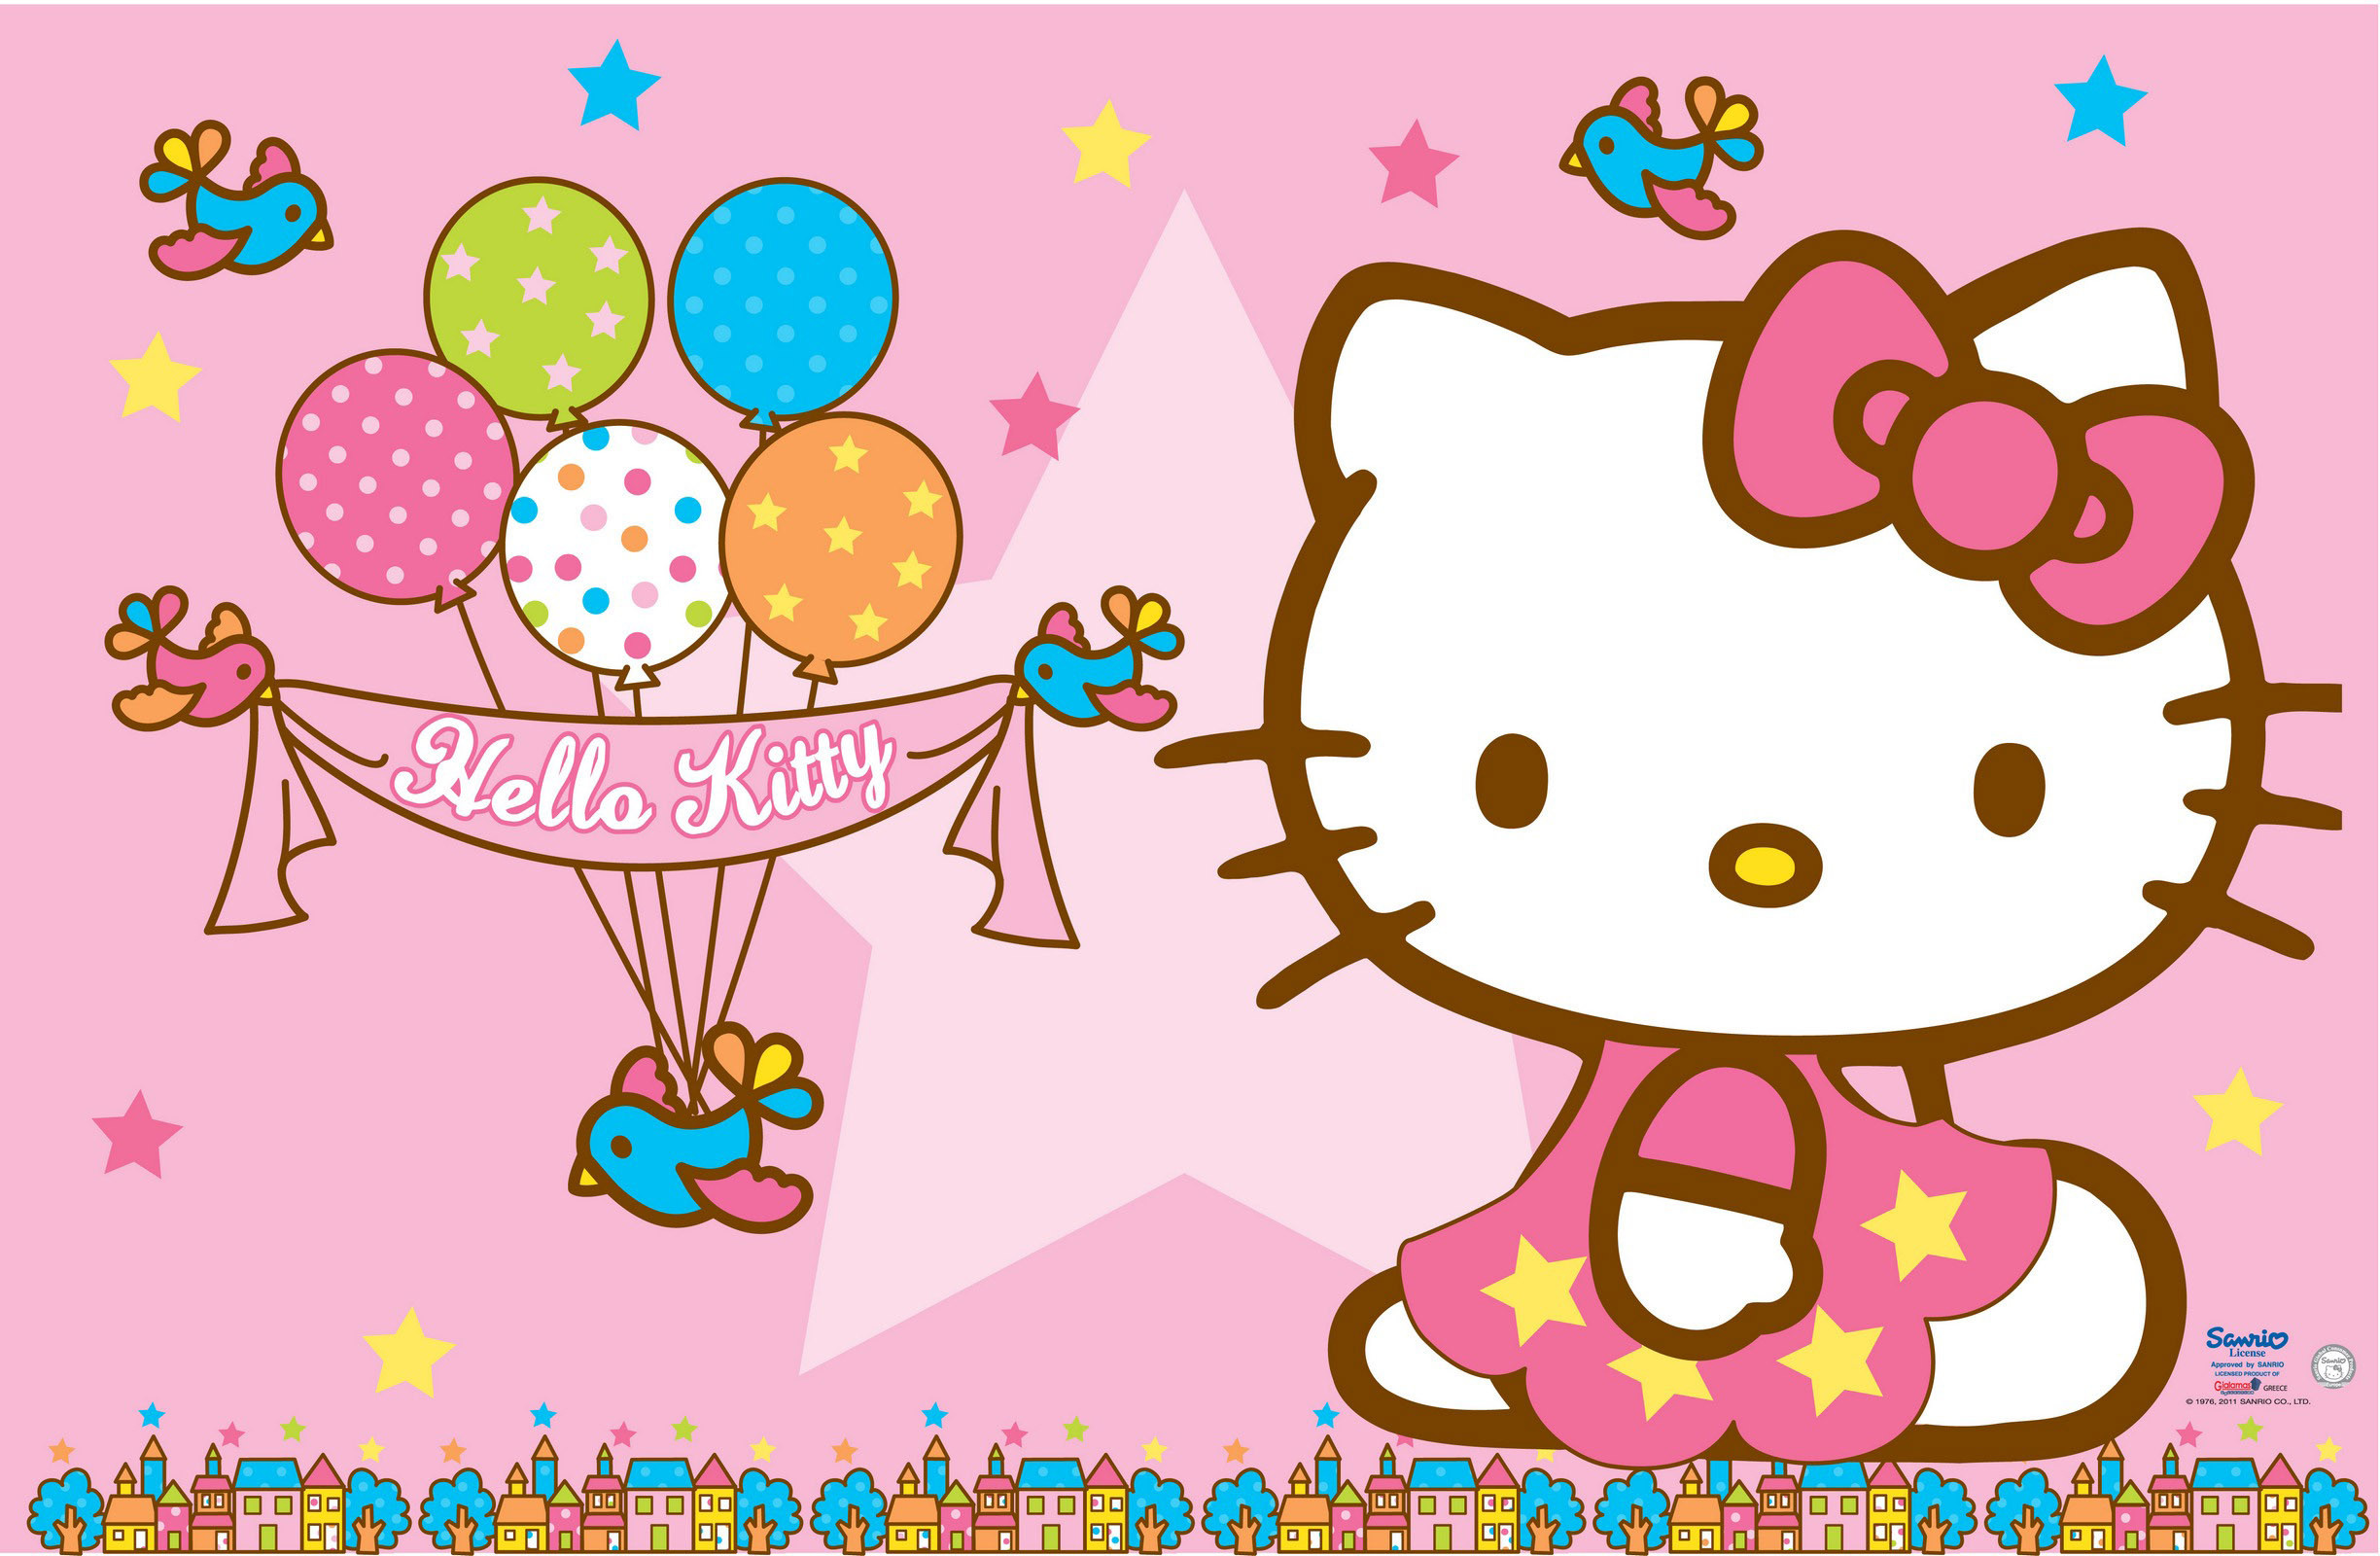 Hello Kitty Wallpapers Collection For Free Download - Hello Kitty Wallpaper Background - HD Wallpaper 